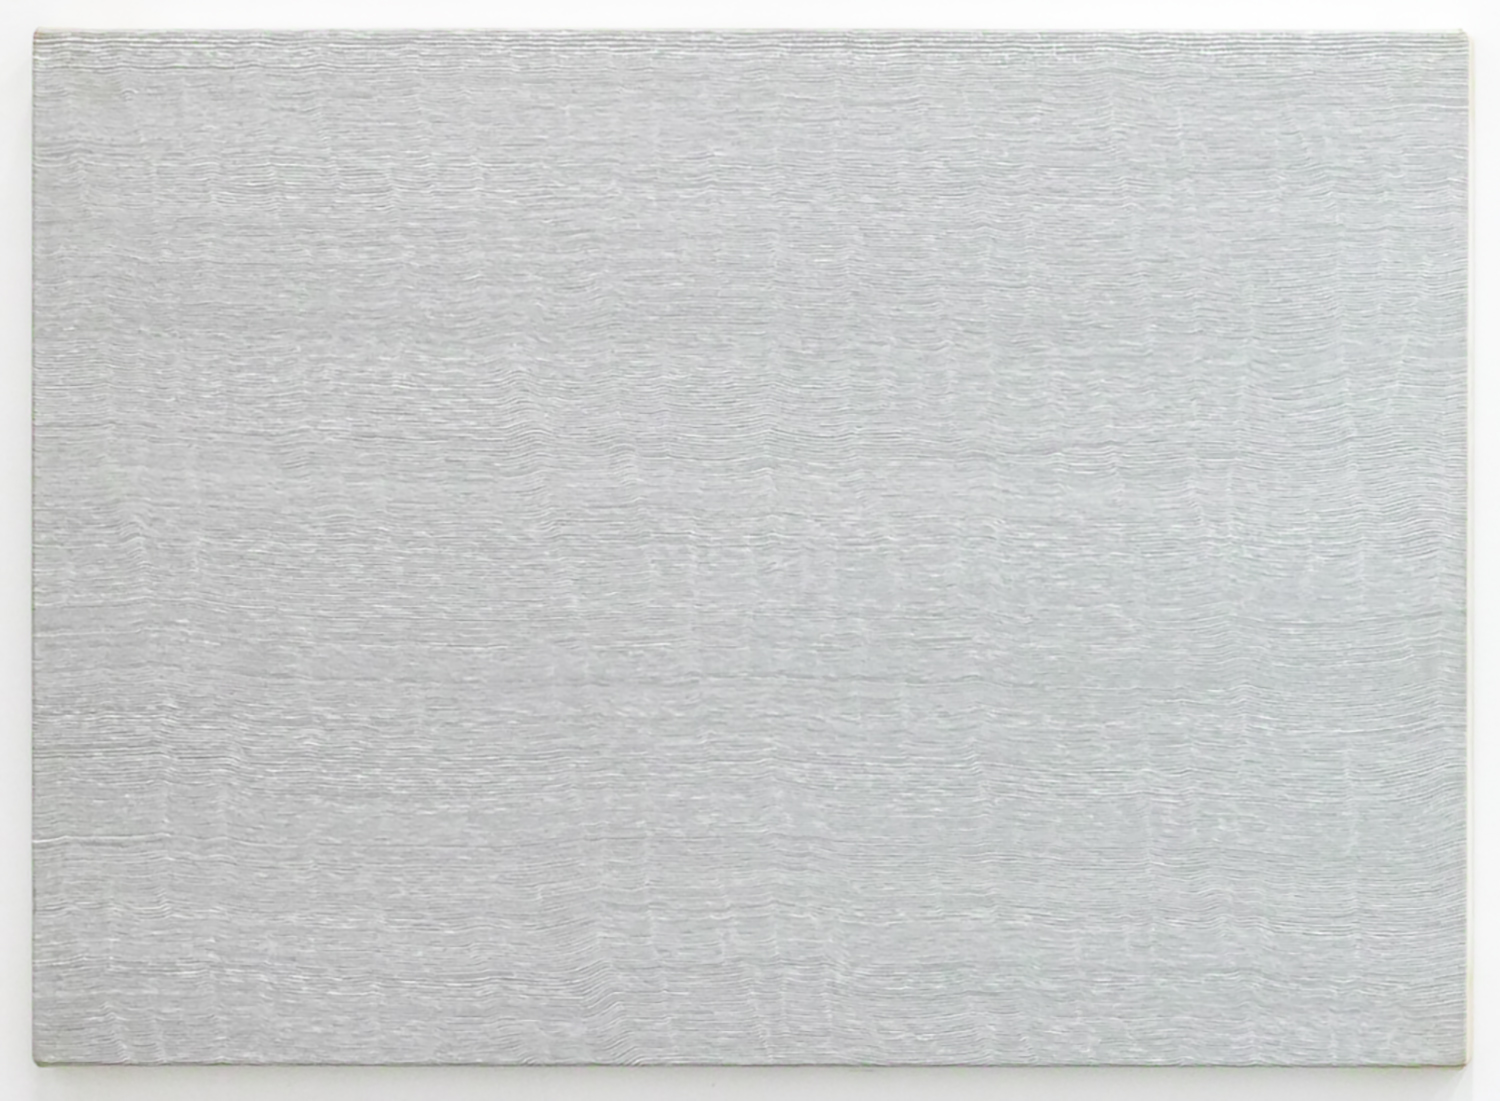 Untitled-Breathe Cool gray<br>Acrylic & gesso on canvas, 56.5 x 78 cm 1996